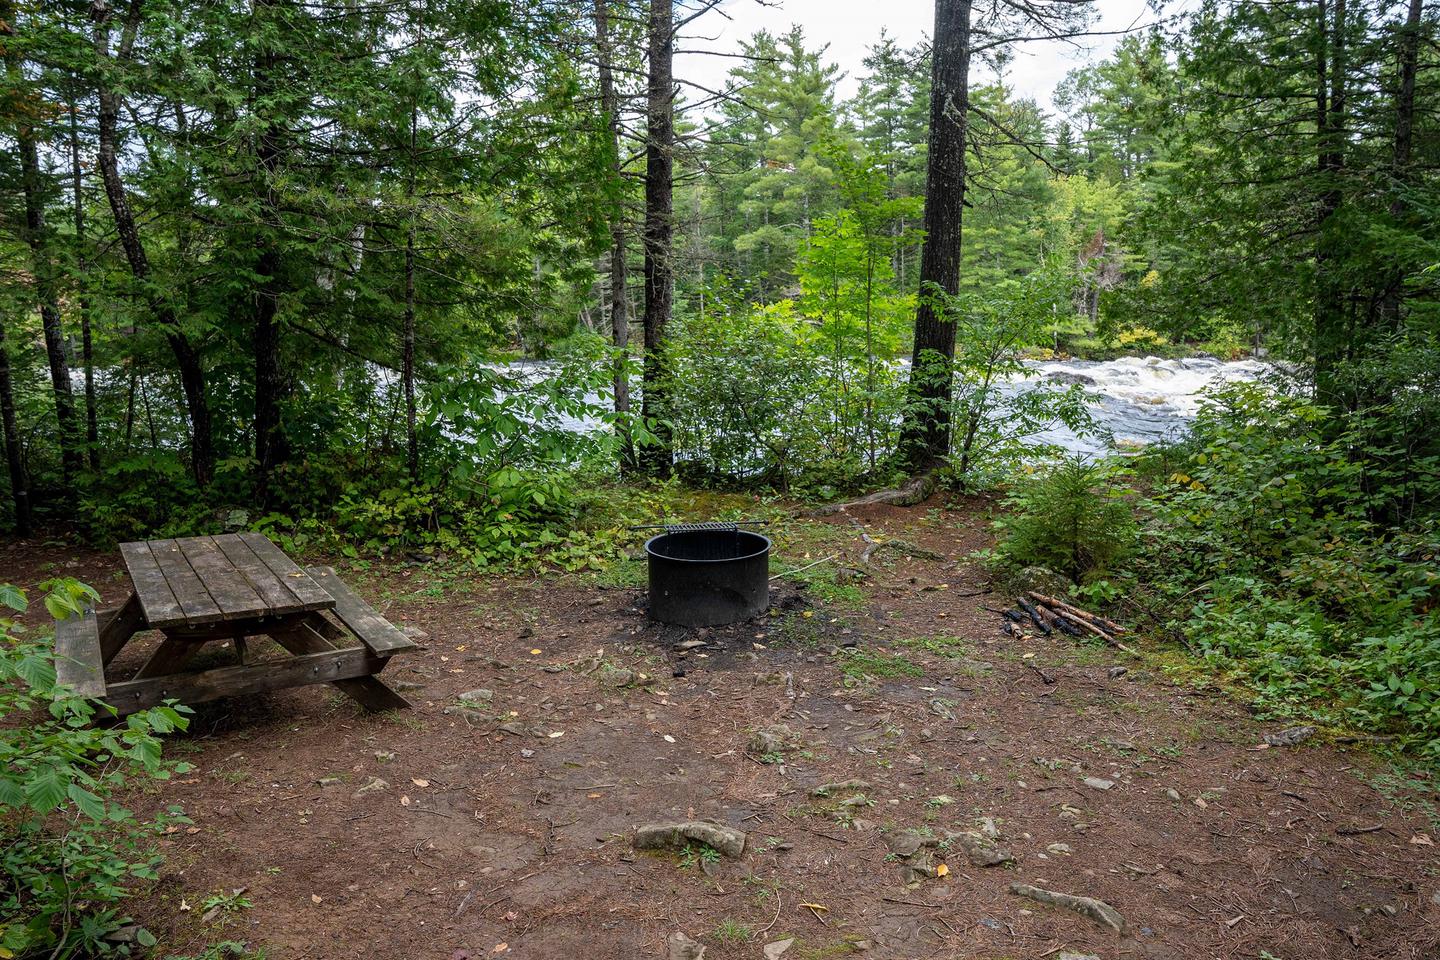 A campsite next to a river. The campsite has a wooden picnic table and a metal fire ring. The ground is made of dirt and gravel with some uneven surfaces. Brush and tall trees surround the perimeter of the campsite.Enjoy the views of the East Branch of the Penobscot River from this campsite.